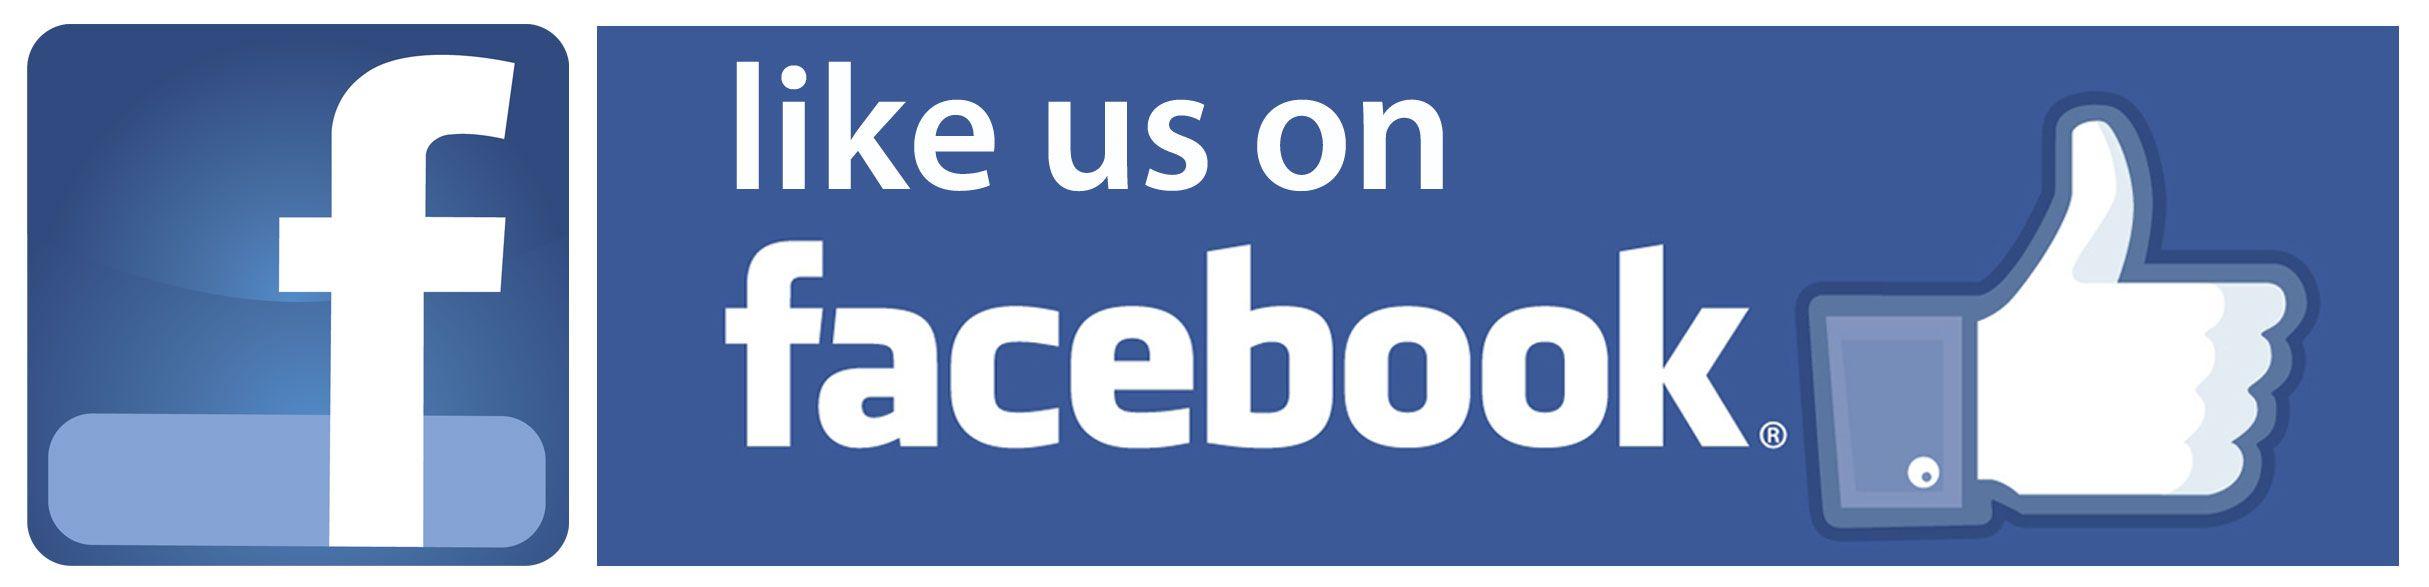 Find Us On Facebook Logo - Facebook Logo Transparent PNG Pictures - Free Icons and PNG Backgrounds